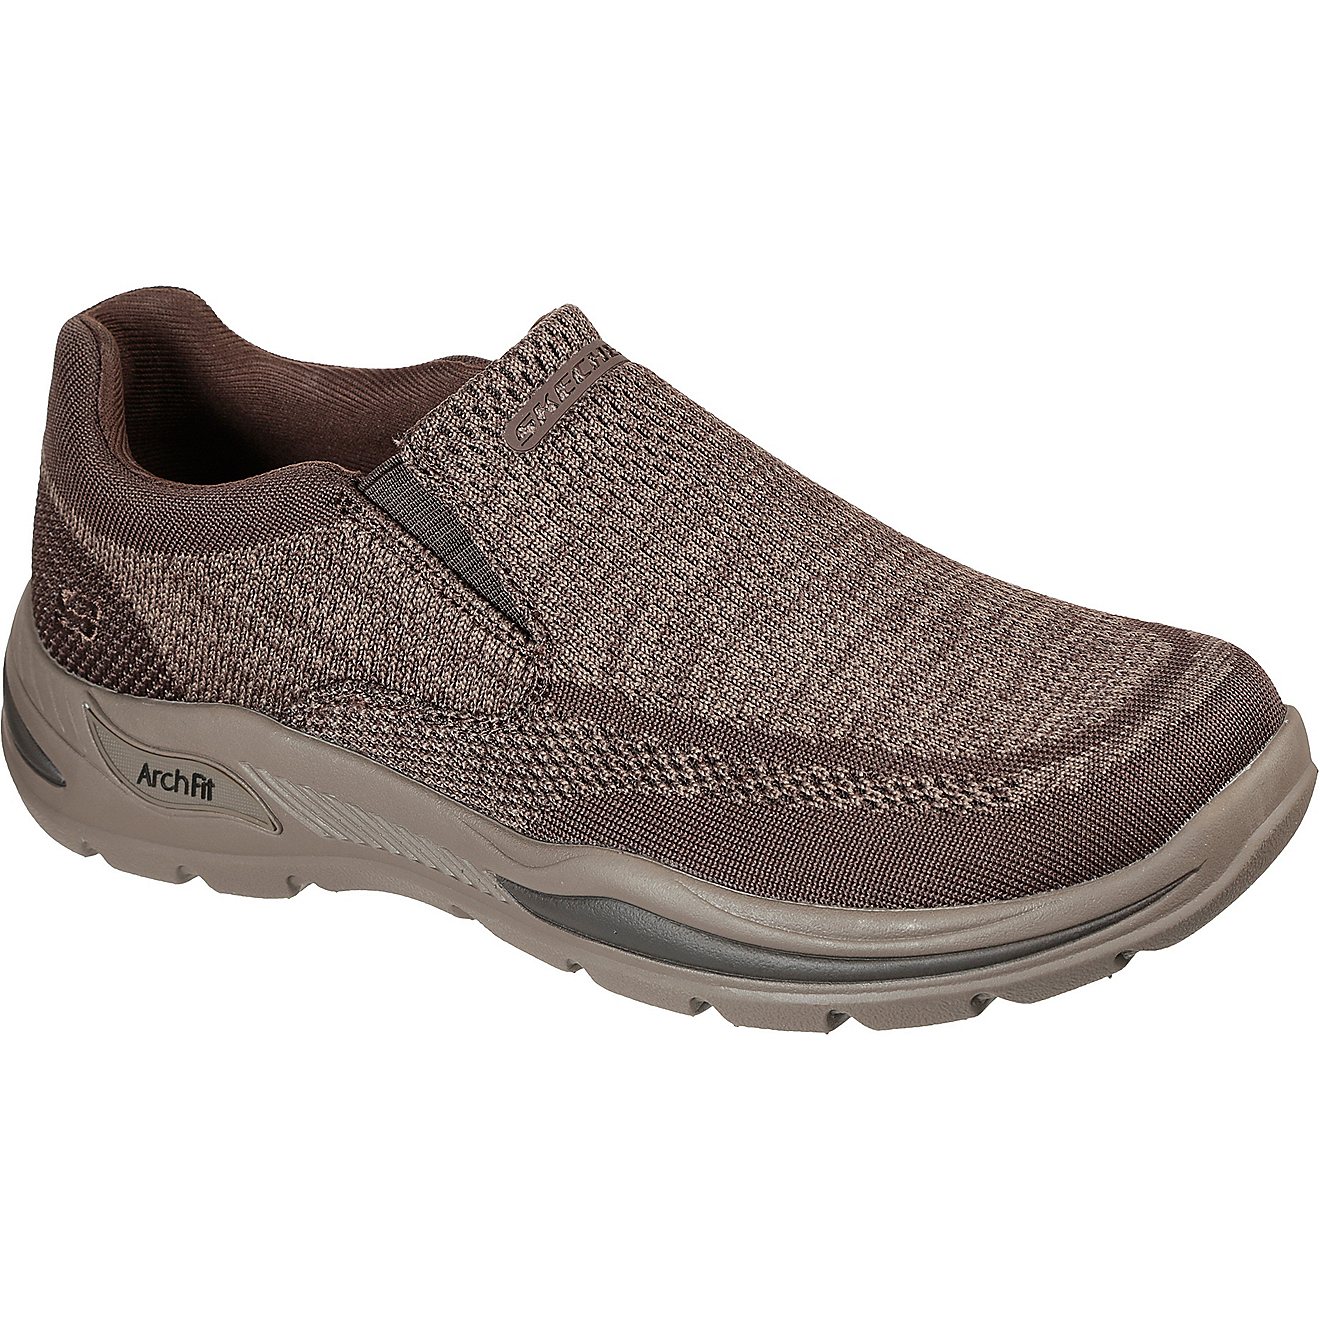 SKECHERS Men's Arch Fit Motley Vaseo Shoes                                                                                       - view number 2